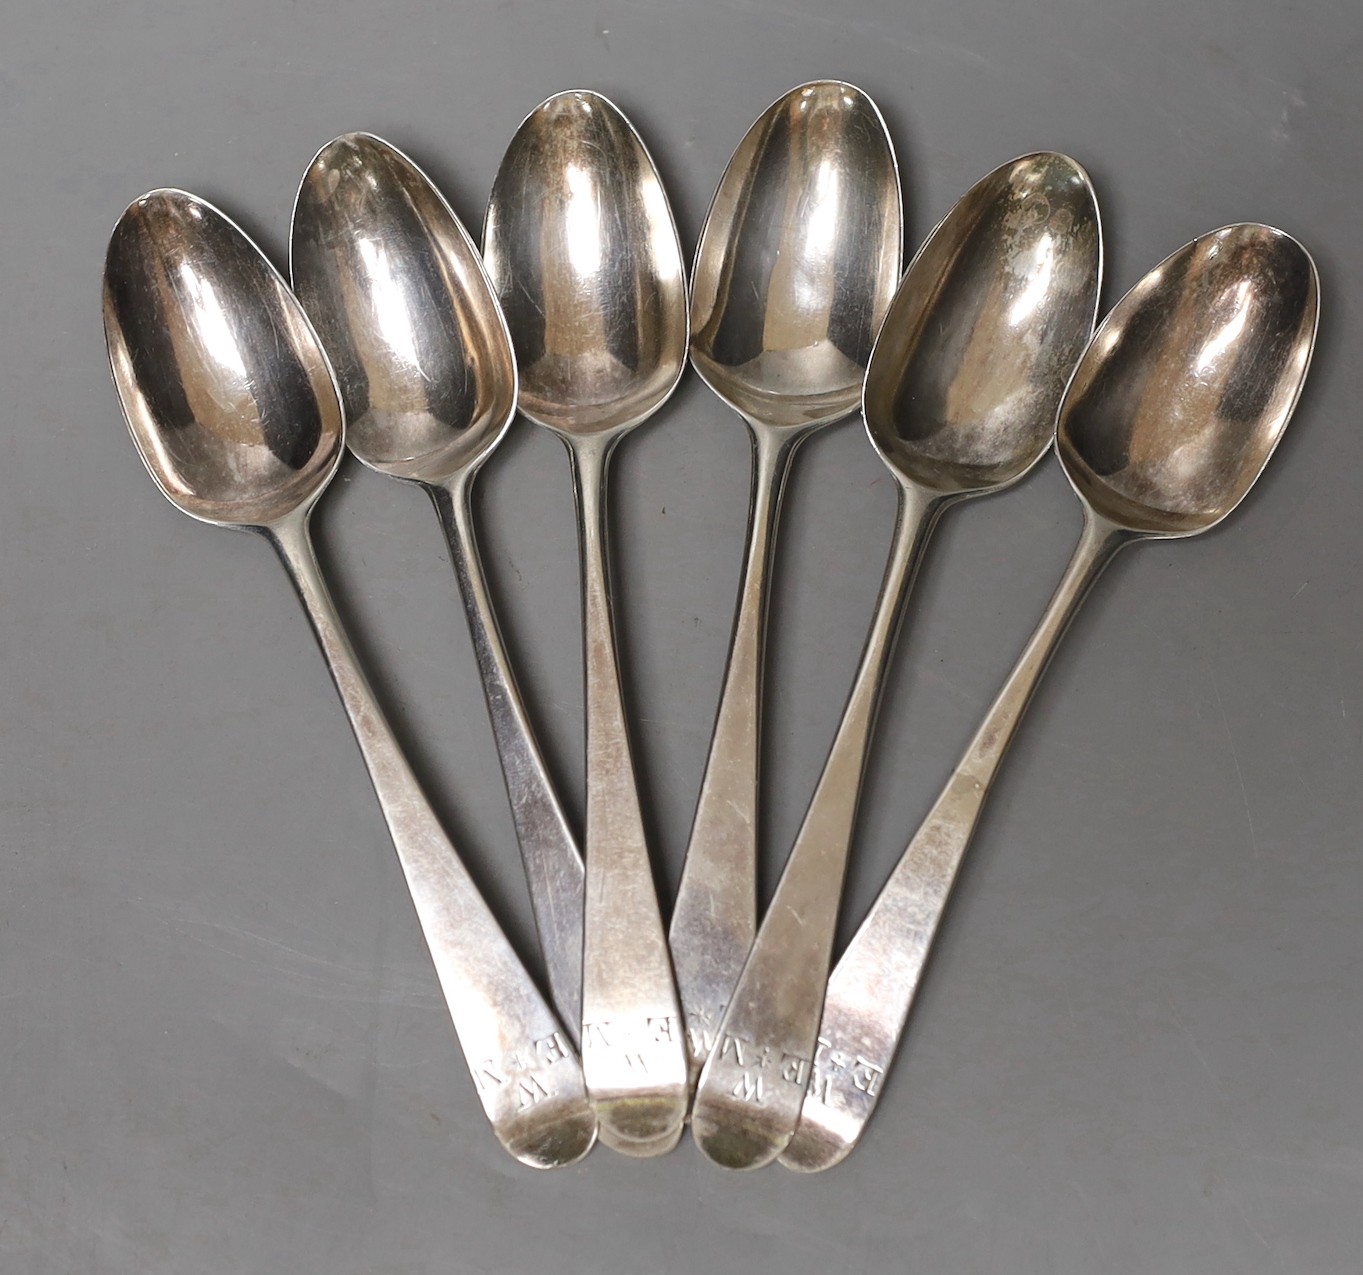 A set of six George III silver Old English patten 'picture' back teaspoons, inscribed 'Plenty', Thomas Wallis, London, 1782, 77 grams.                                                                                      